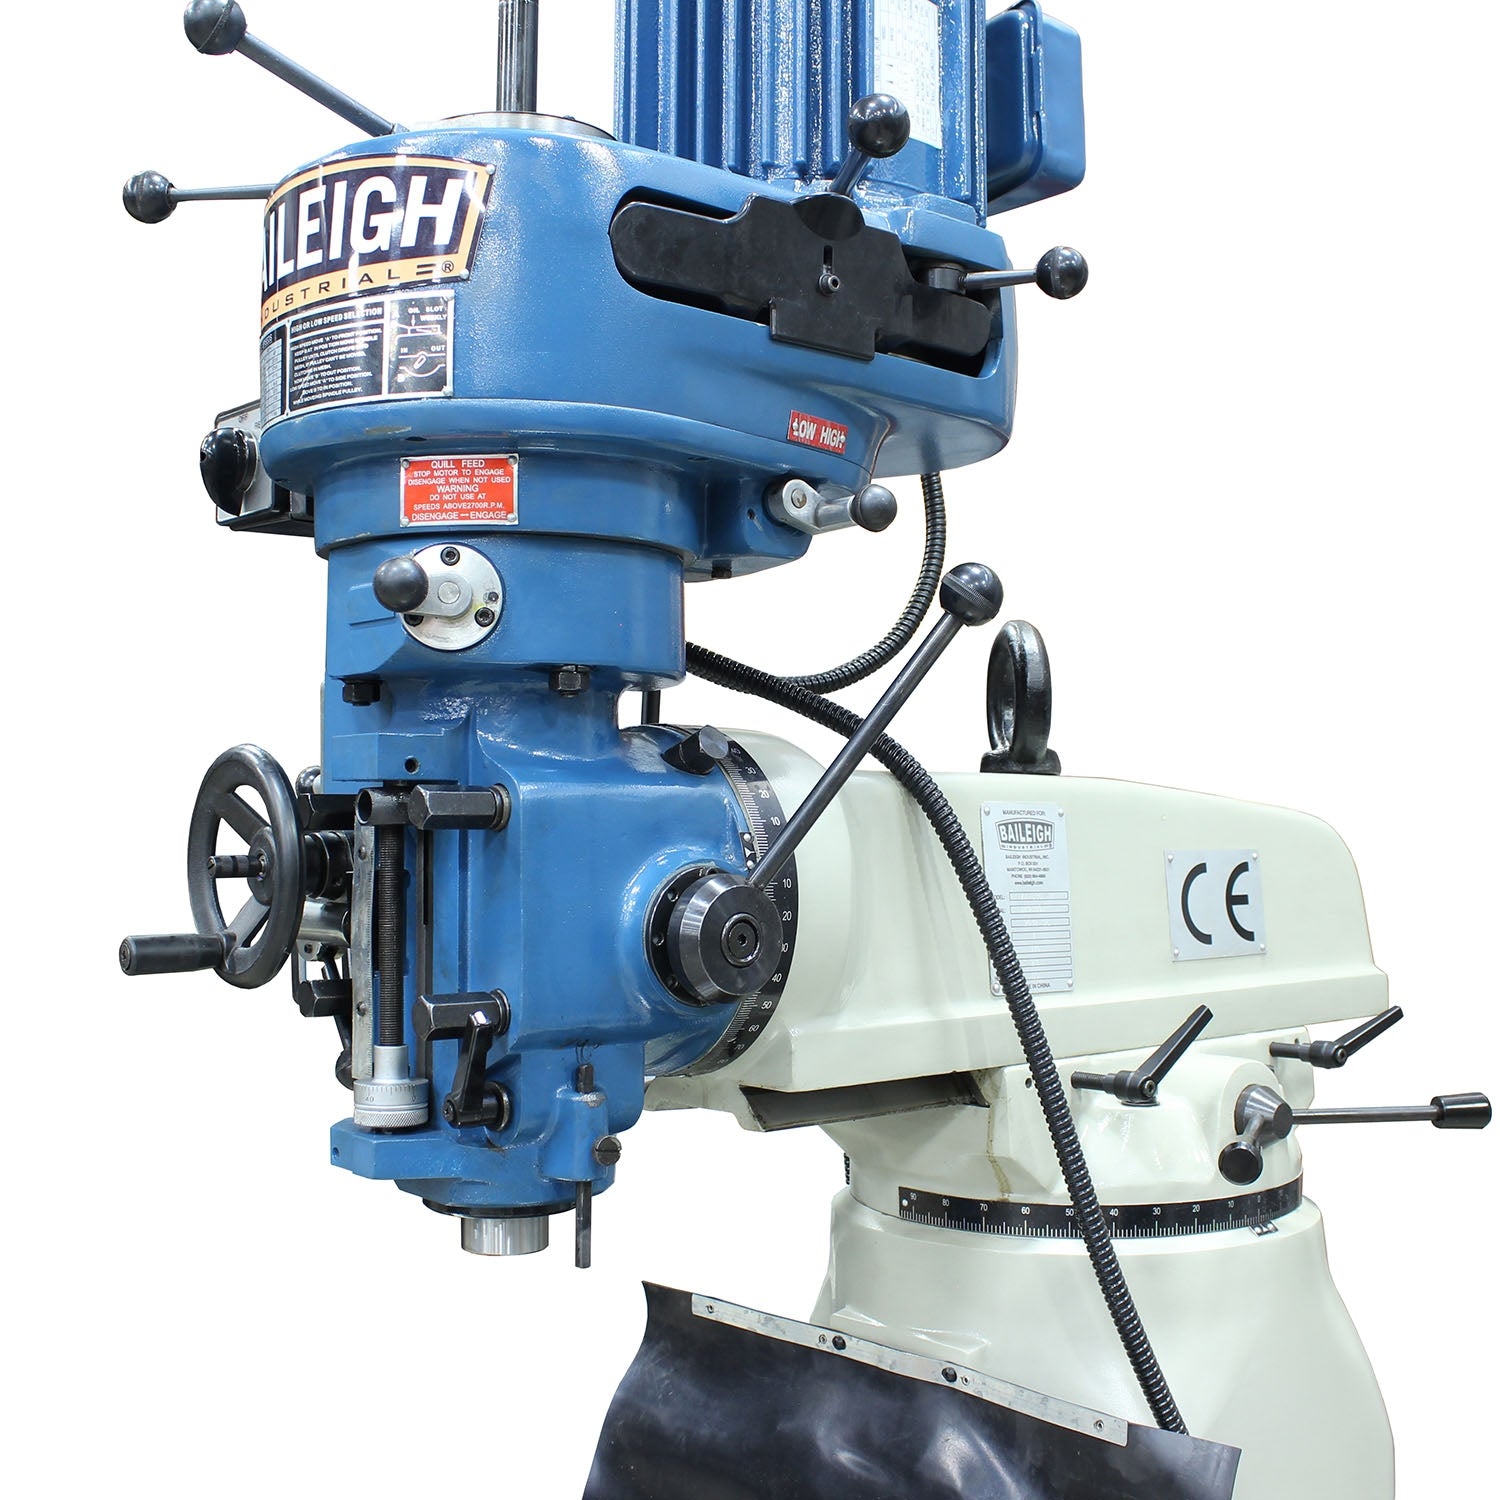 Baileigh VM-836E-1 120V Vertical Mill, 8" x 36" Table, 8 Speed Includes R8 Spindle, Coolant, Lubricator, Work Light